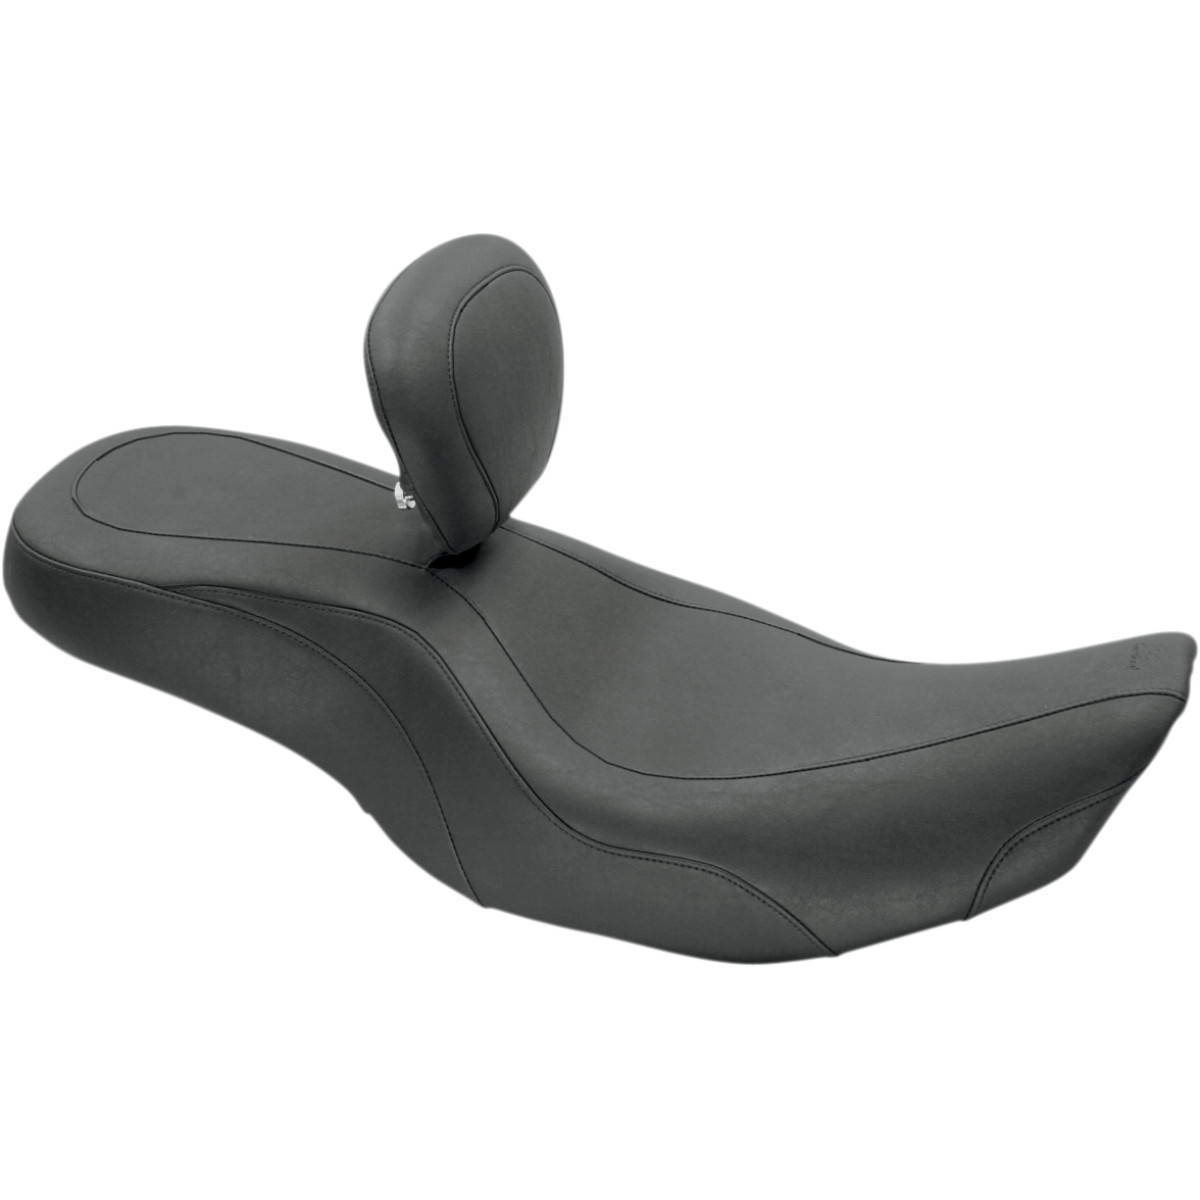 HARLEY DAVIDSON FLHR SEAT ONE-PIECE WIDE TRIPPER™ 2-UP SPECIAL PLAIN WITH DRIVER BACKREST